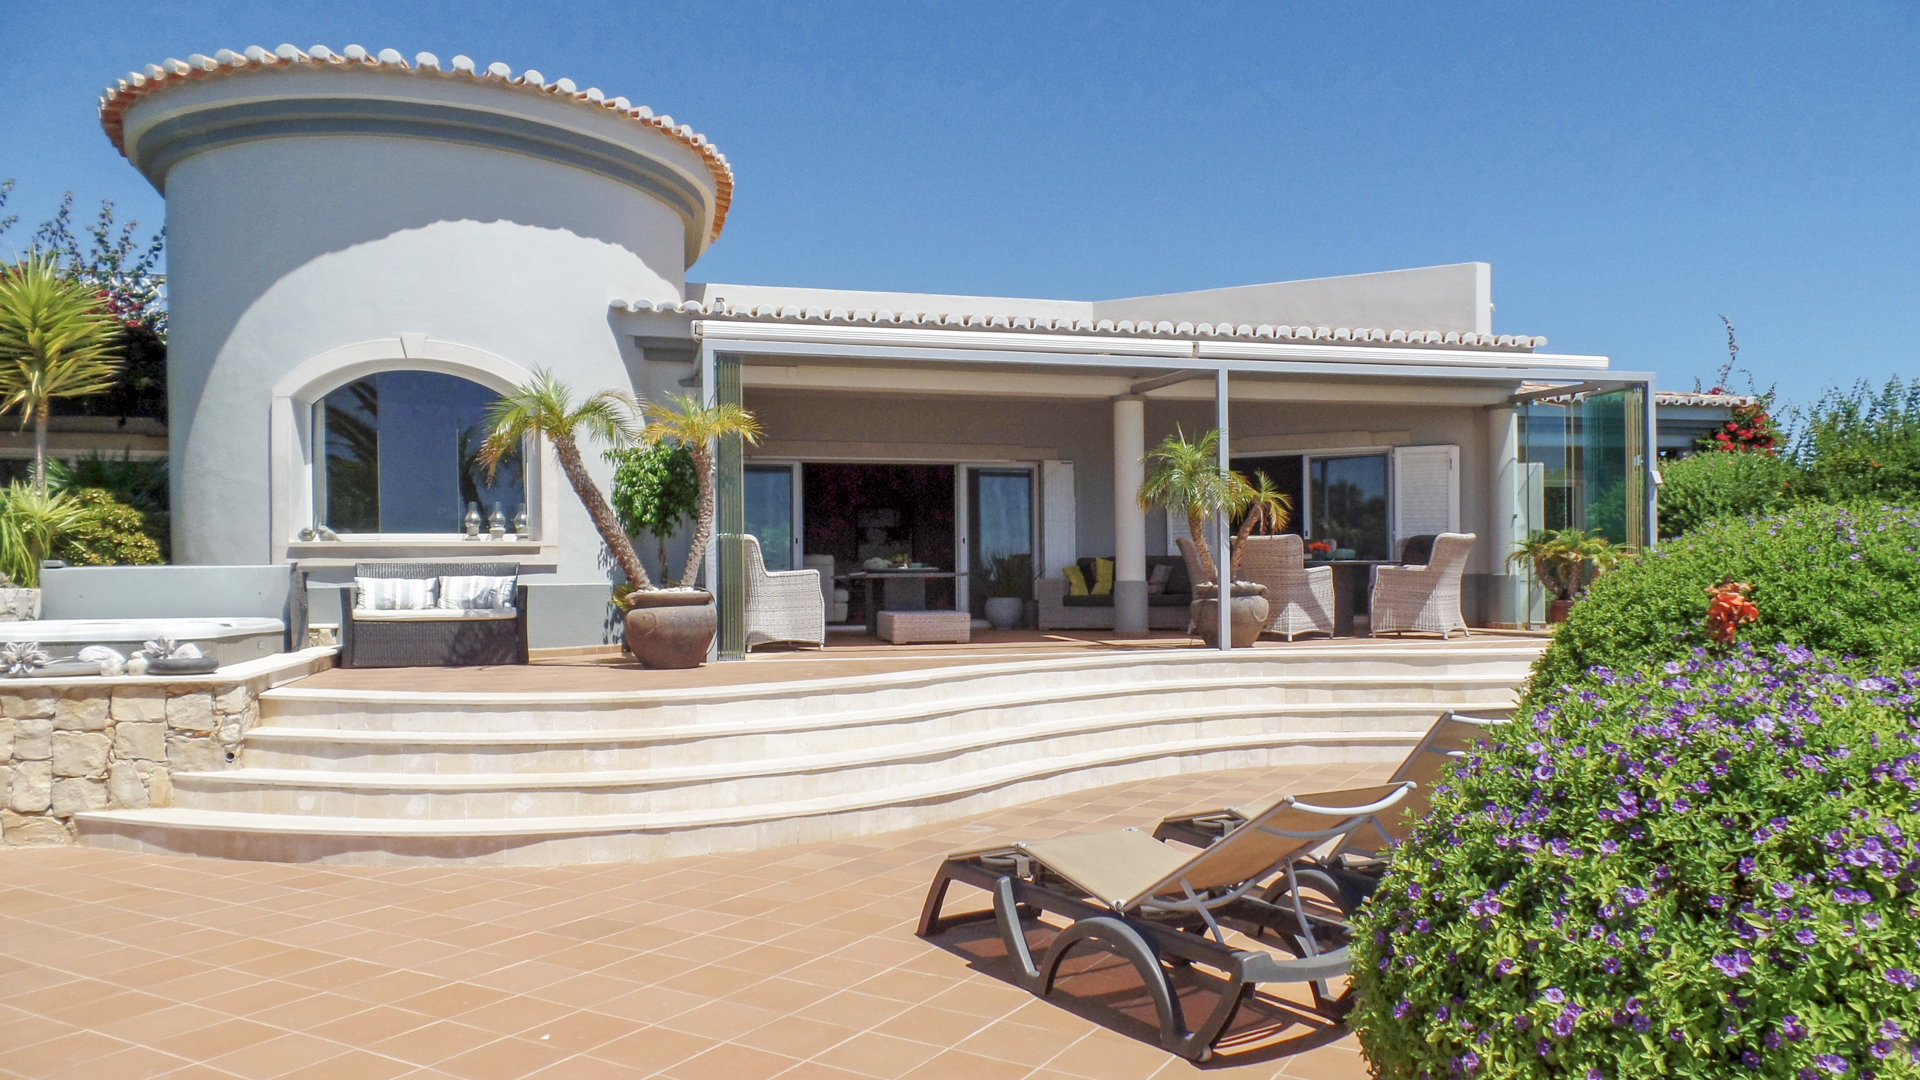 Luxury 4 bedroom villa with stunning sea views in Boa Nova, near Carvoeiro | S2494 4 bedroom villa with pool and jacuzzi between Ferragudo and Carvoeiro. The villa has a wonderful location, big living area, fantastic sea views and it's close to the beach, amenities and golf.